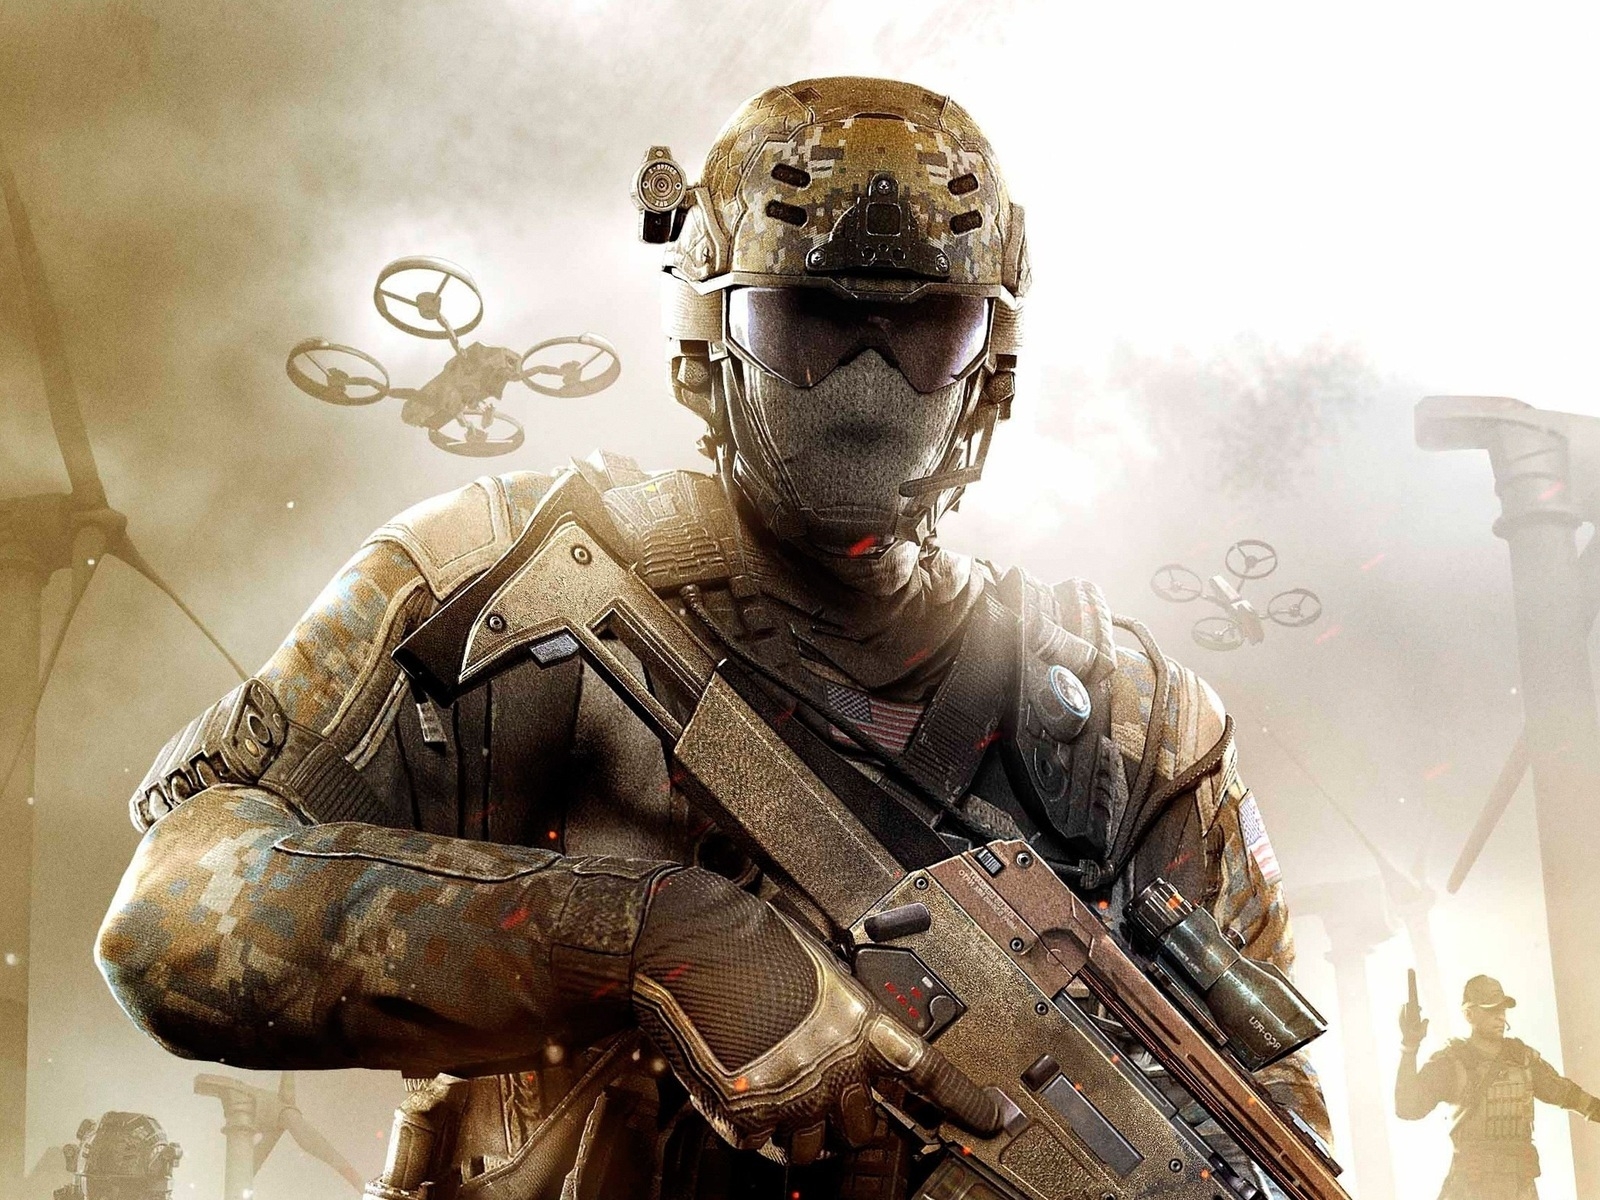 Call of Duty Black Ops 2 Soldier for 1600 x 1200 resolution